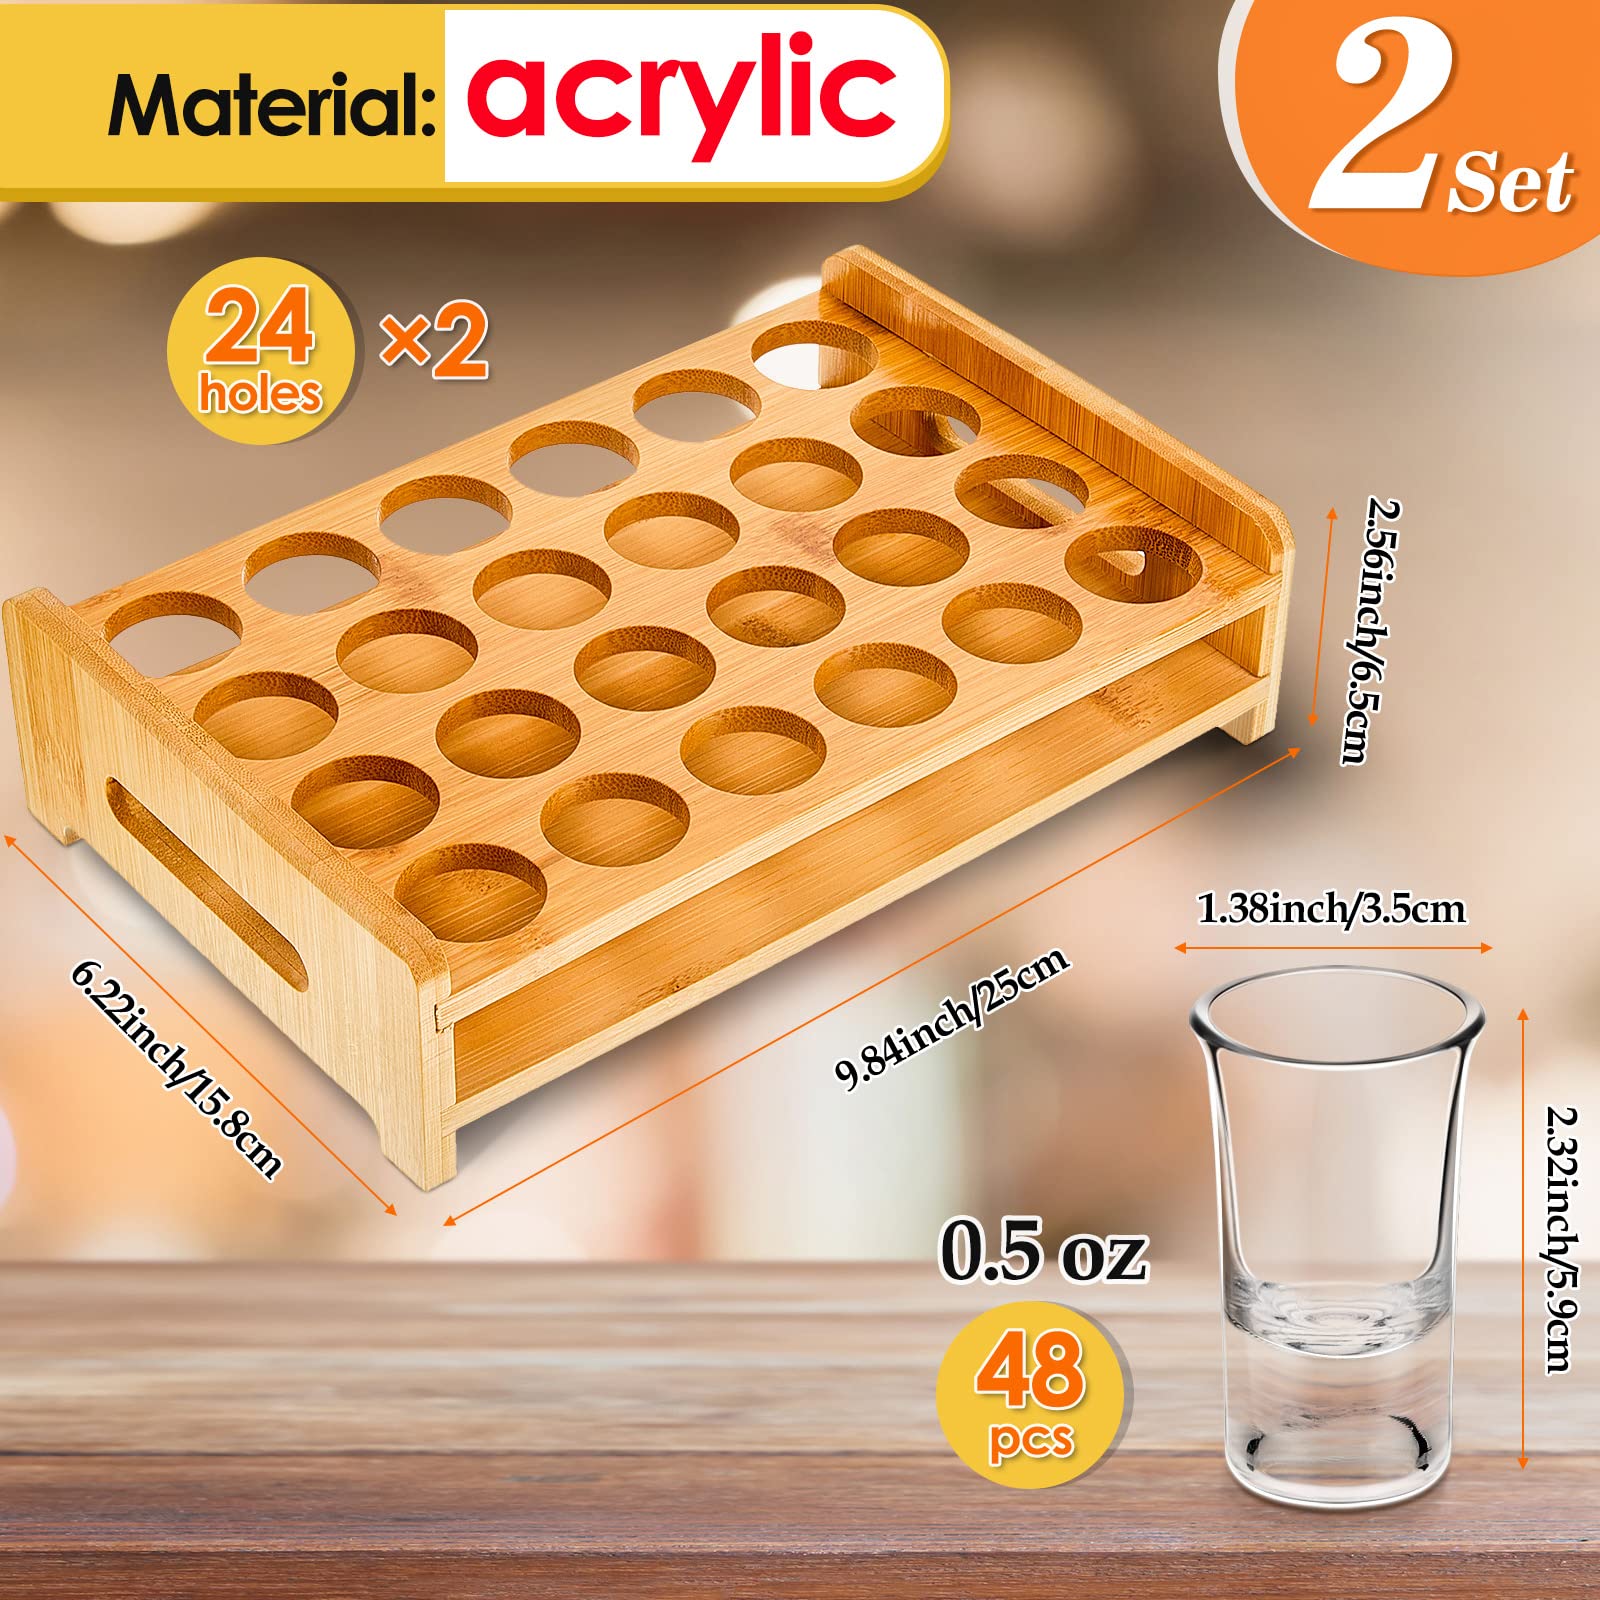 2 Set Shot Glasses Set 24 pcs 0.5 Oz/ 15 ml Mini Acrylic Shot Glass with Tray Holder Wood Serving Tray Tequila Glasses Clear Shot Glasses for Club Party Bar